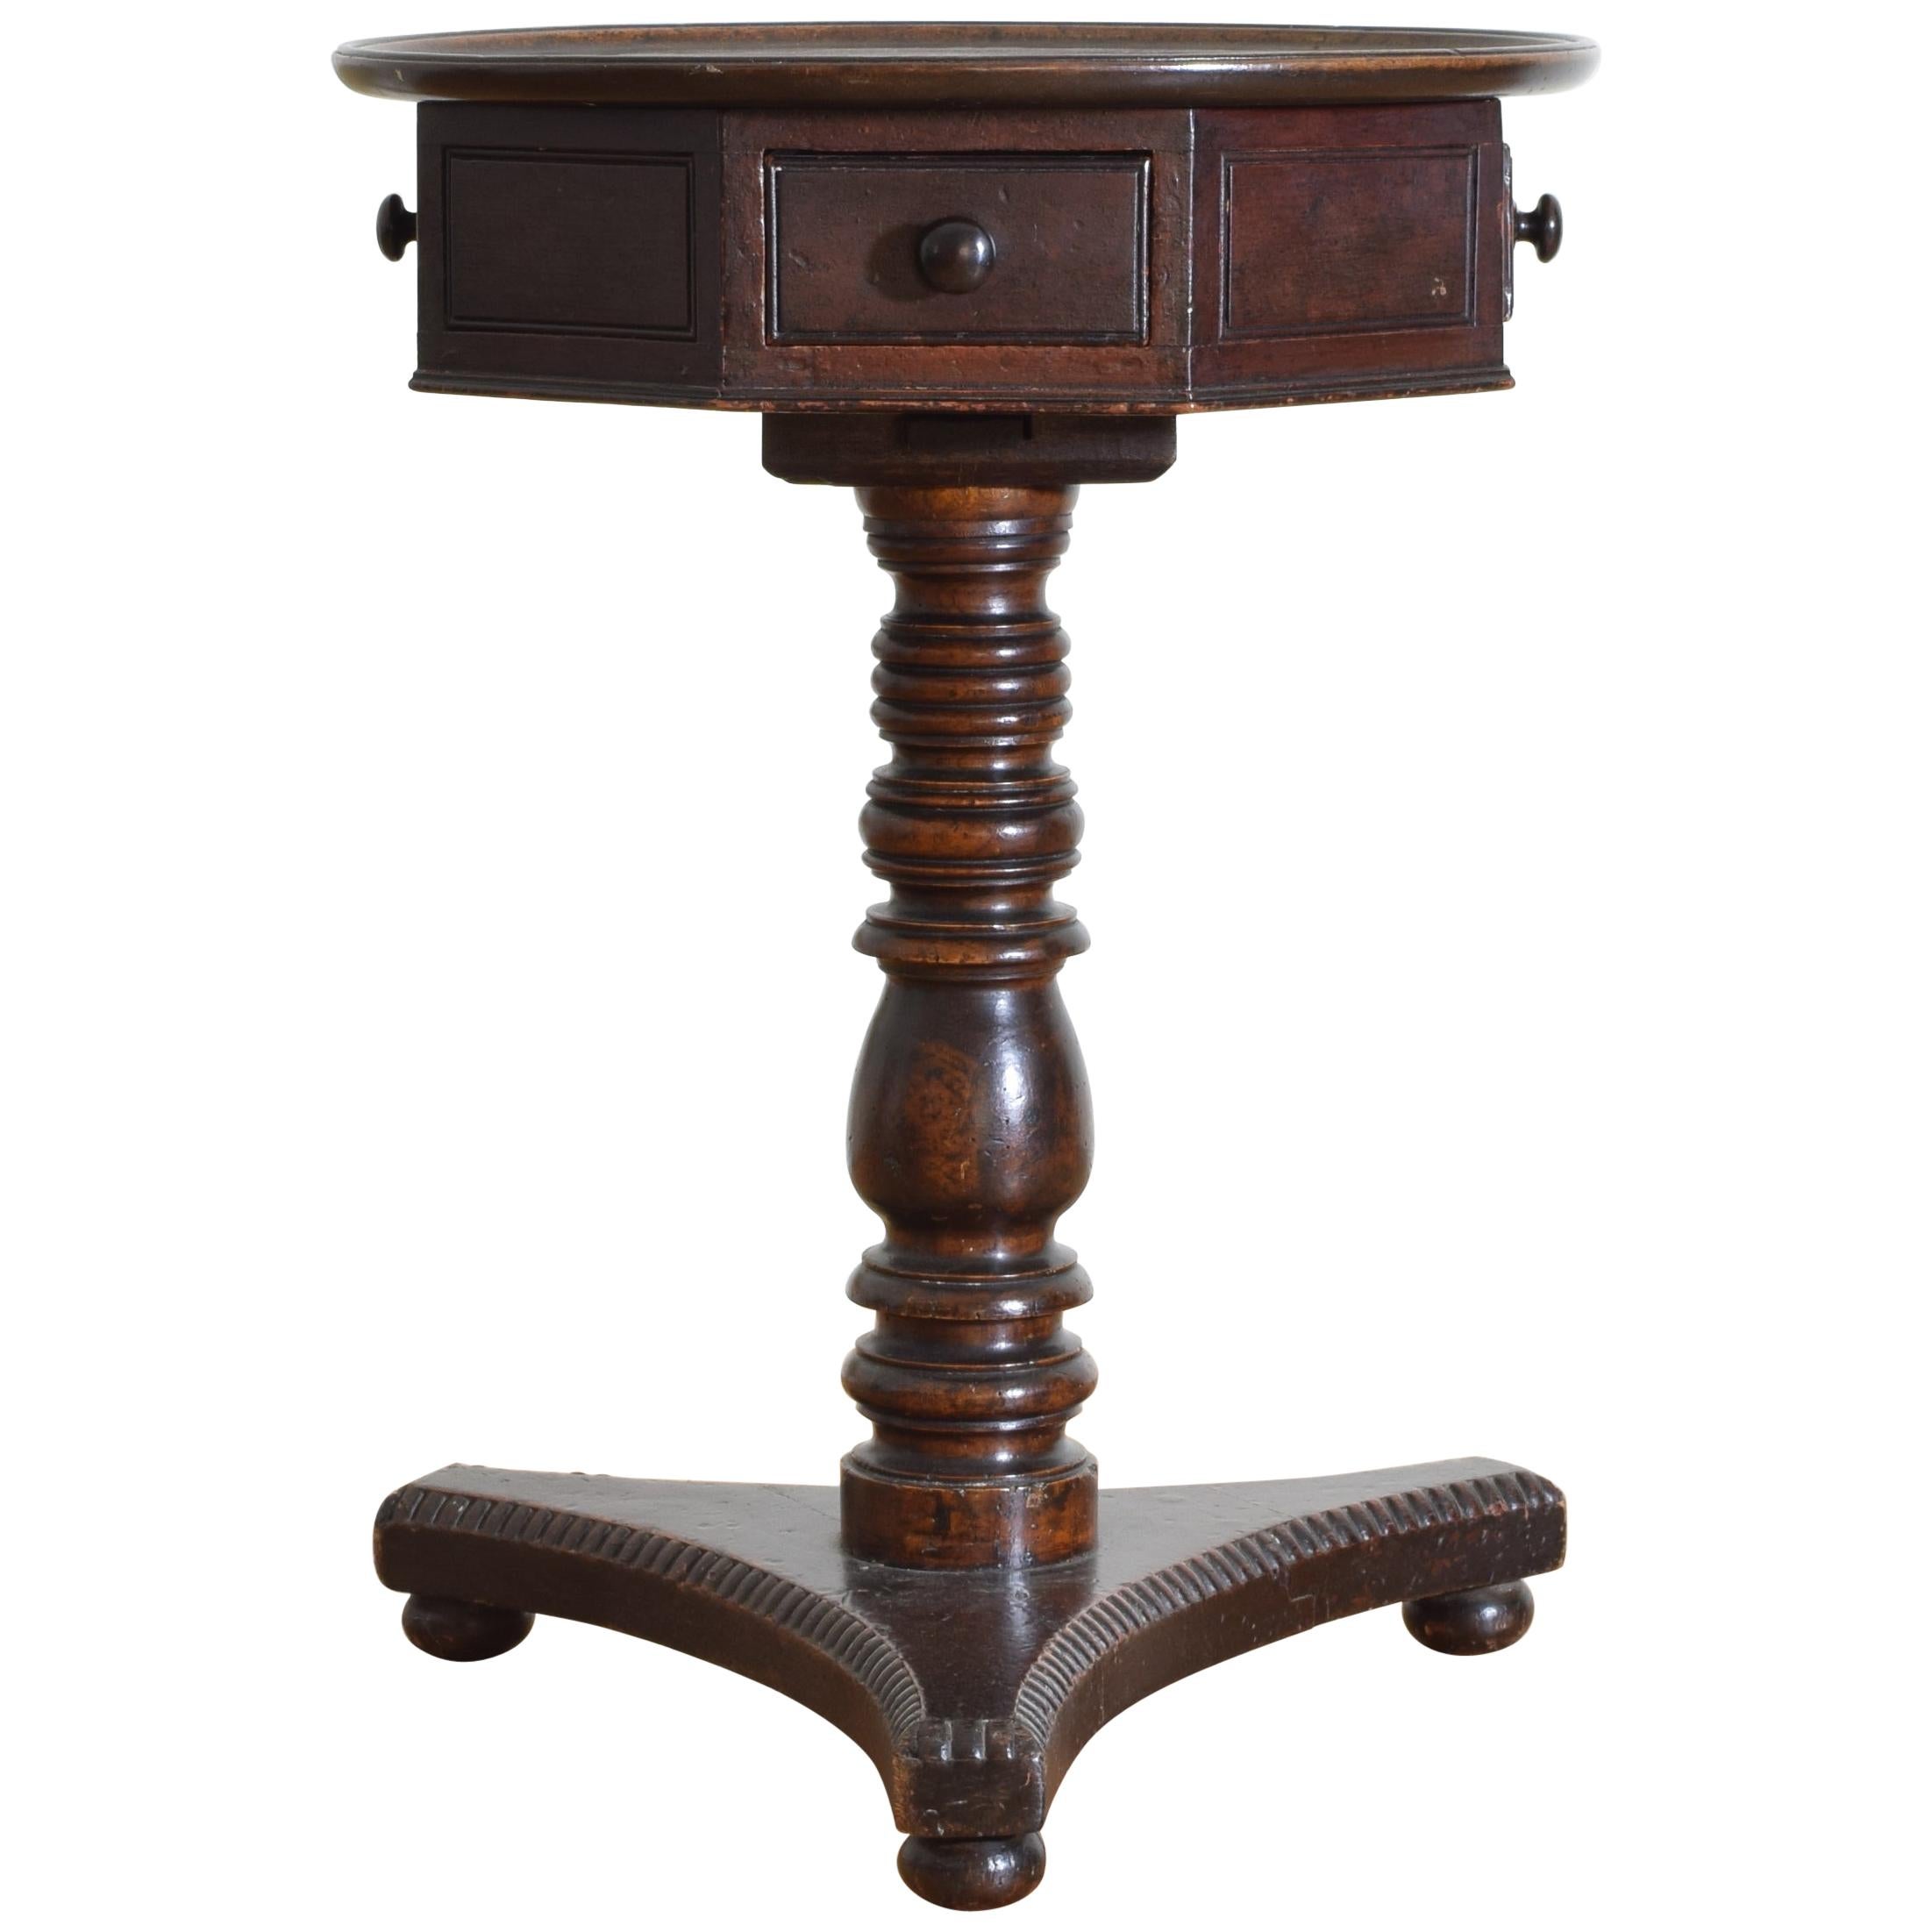 English Mahogany and Grained Ash Drum Table with Dish Top, circa 1830